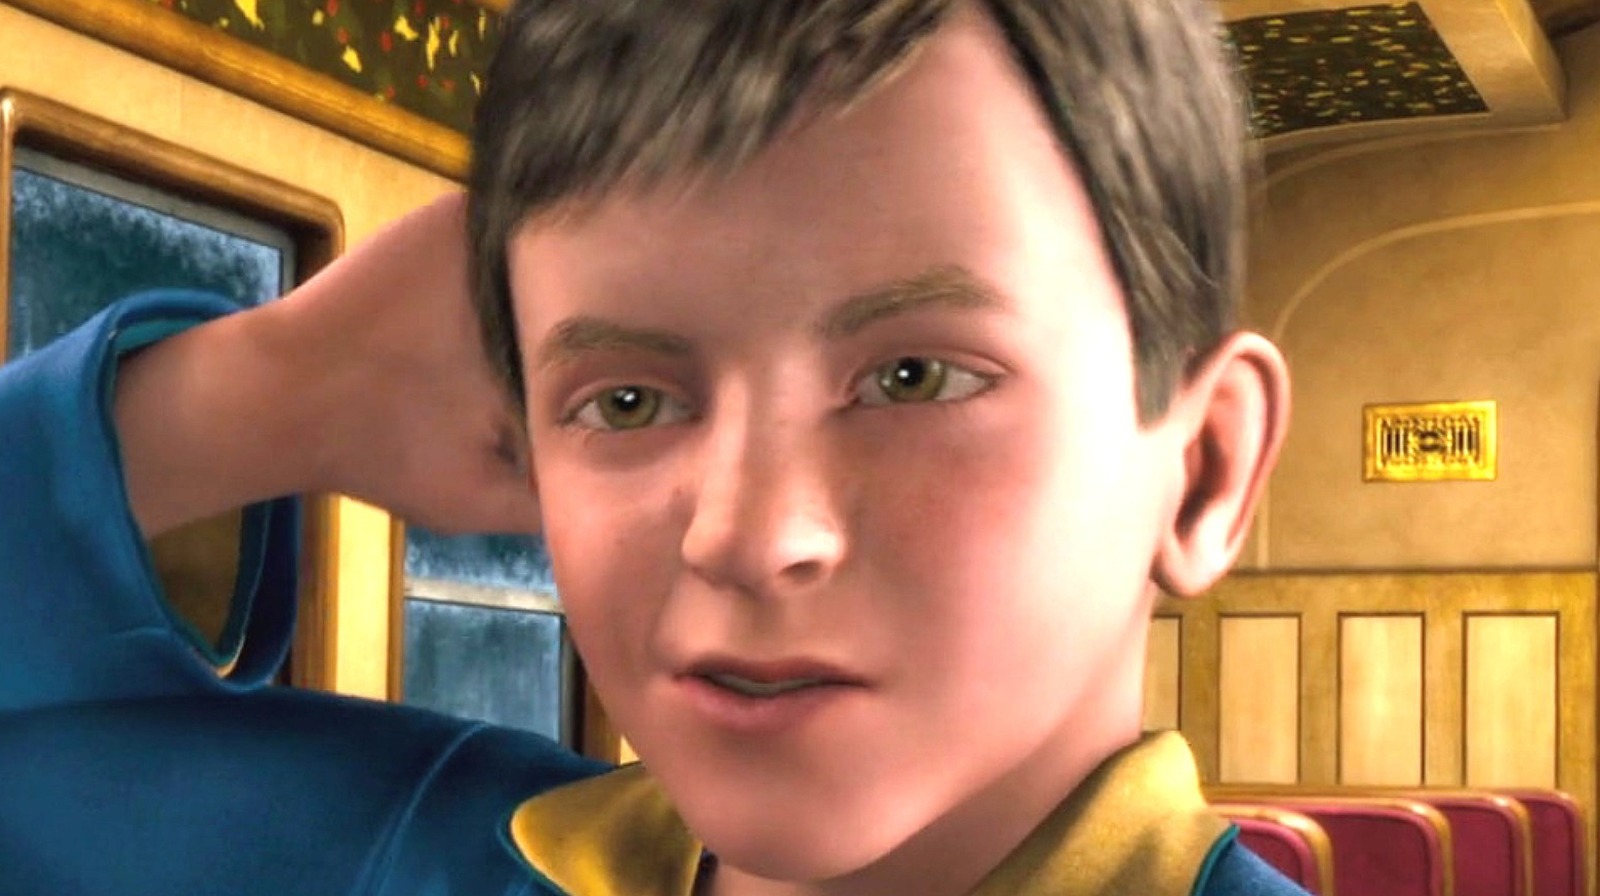 When Will There Be A Polar Express 2?